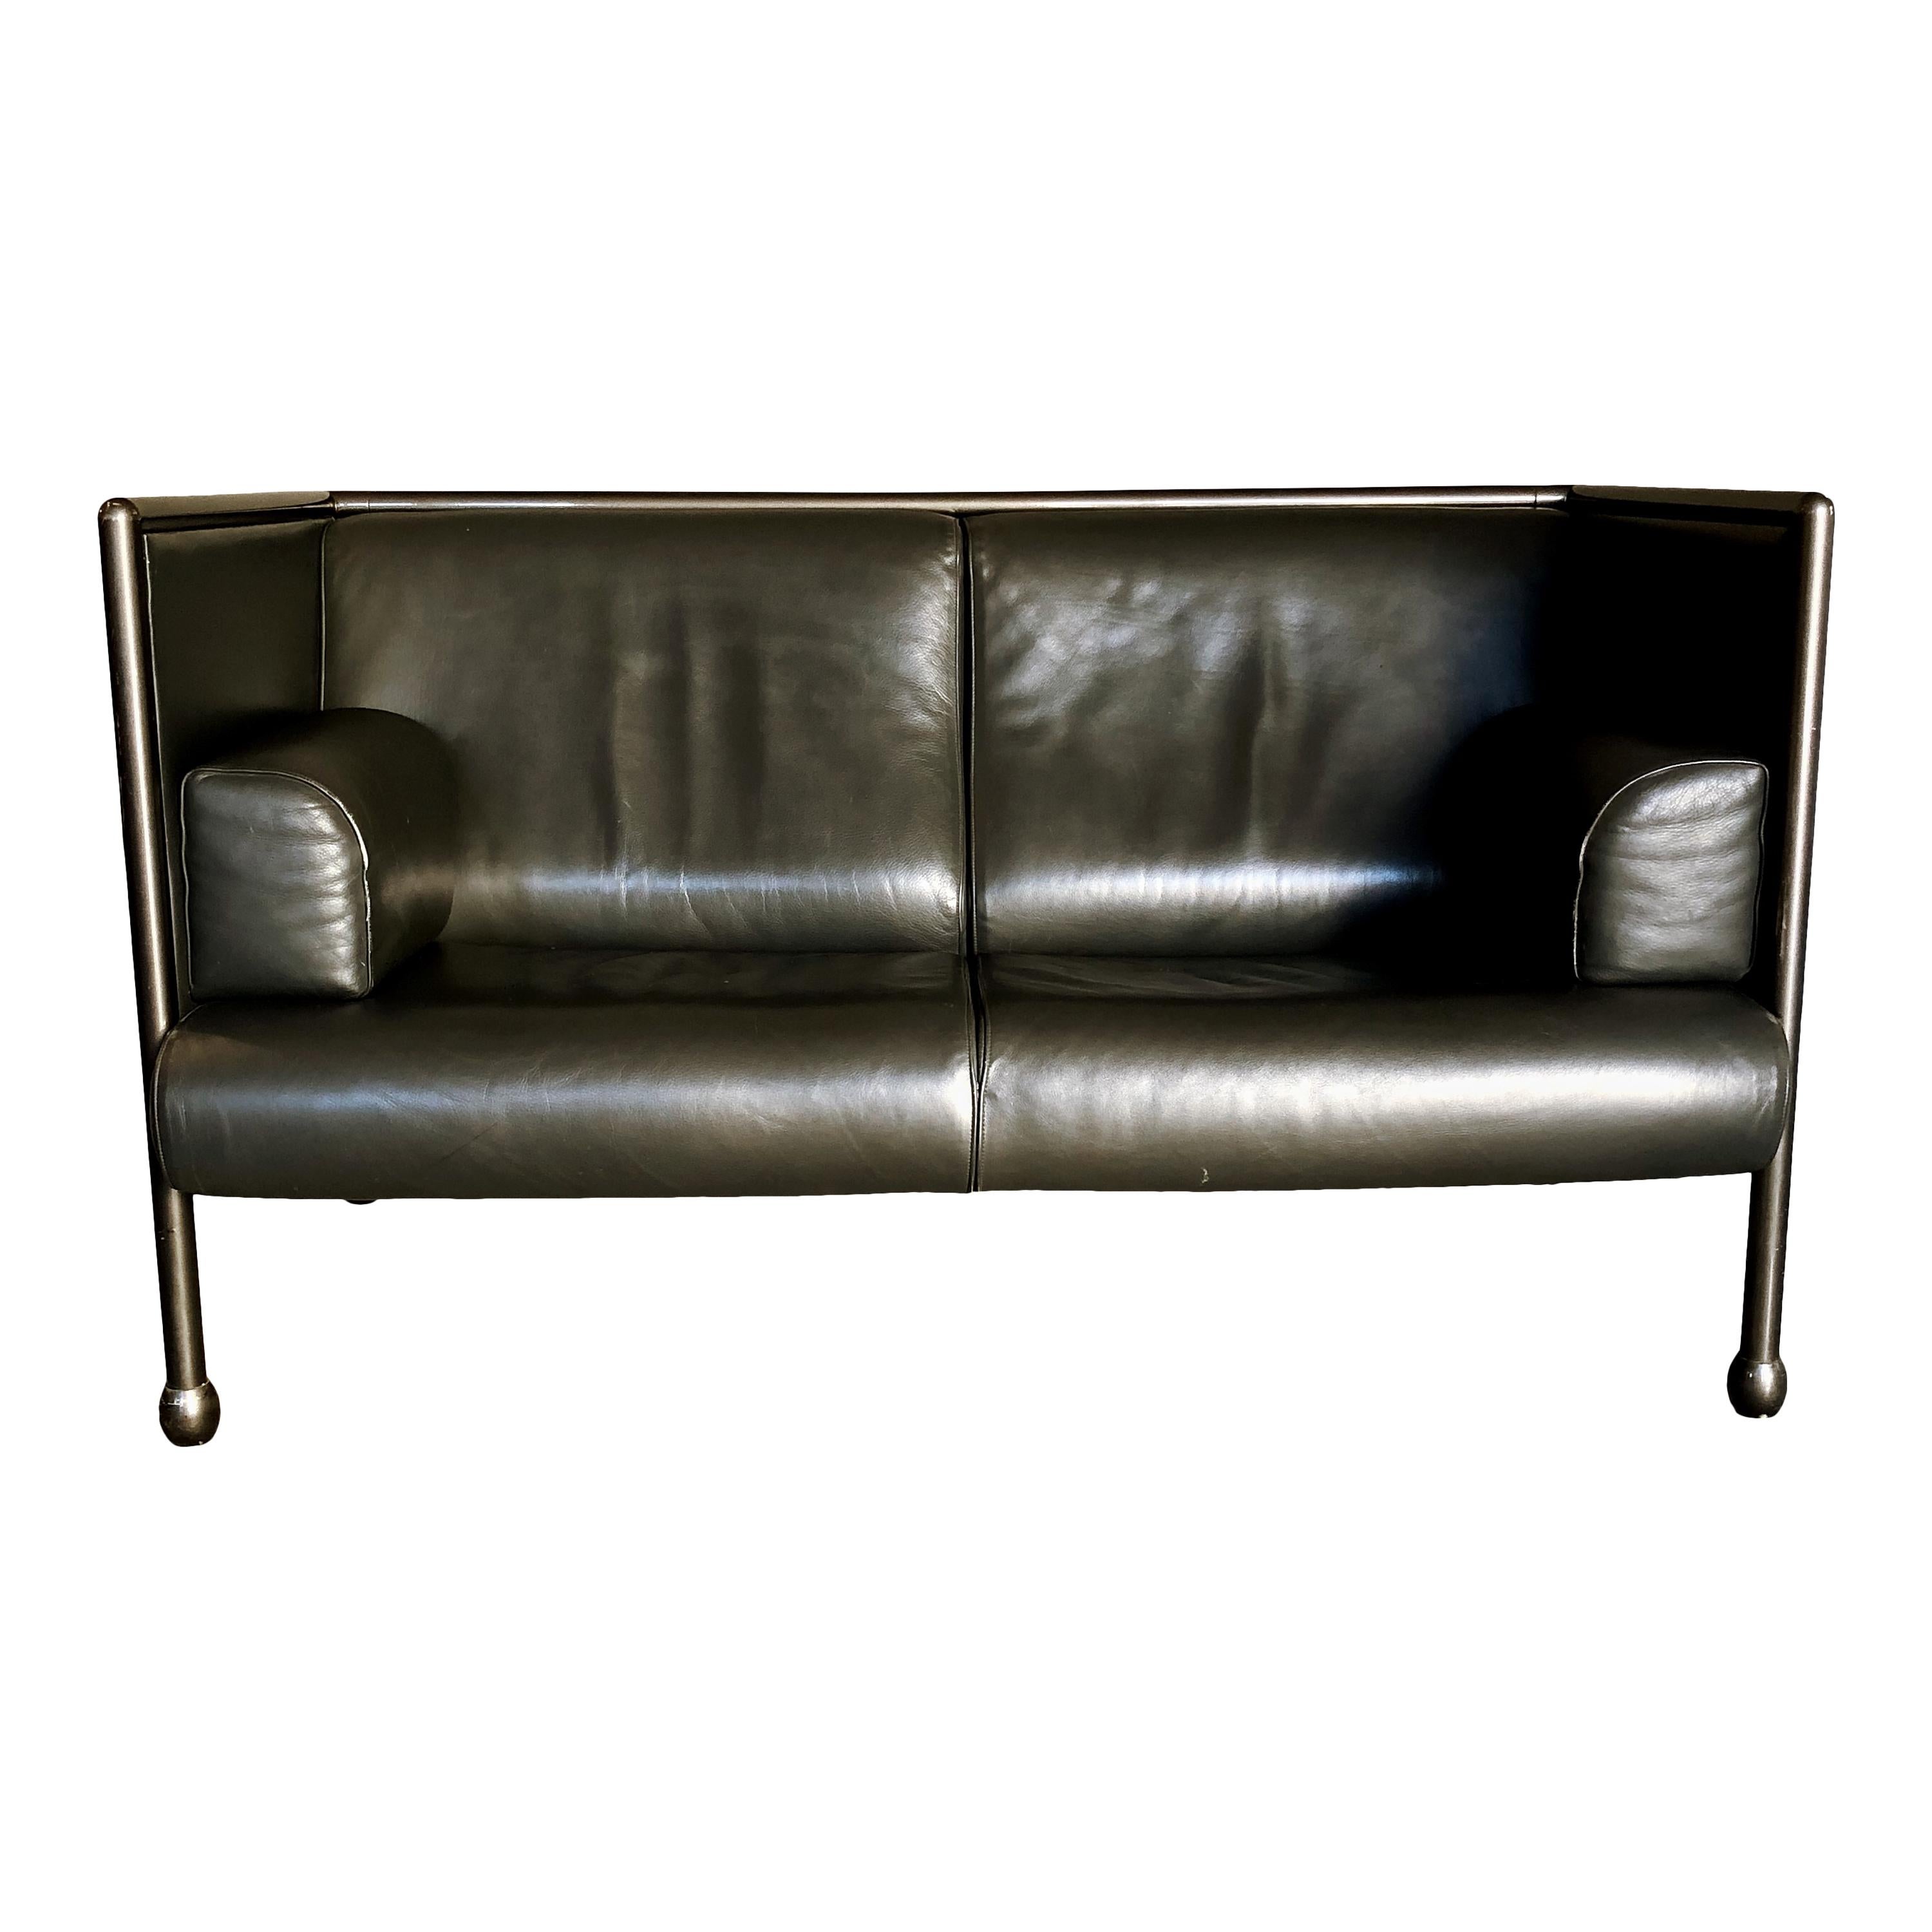 Ettore Sottsass Postmodern Iron and Black Leather Danube Sofa for Cassina, 1992 For Sale 2